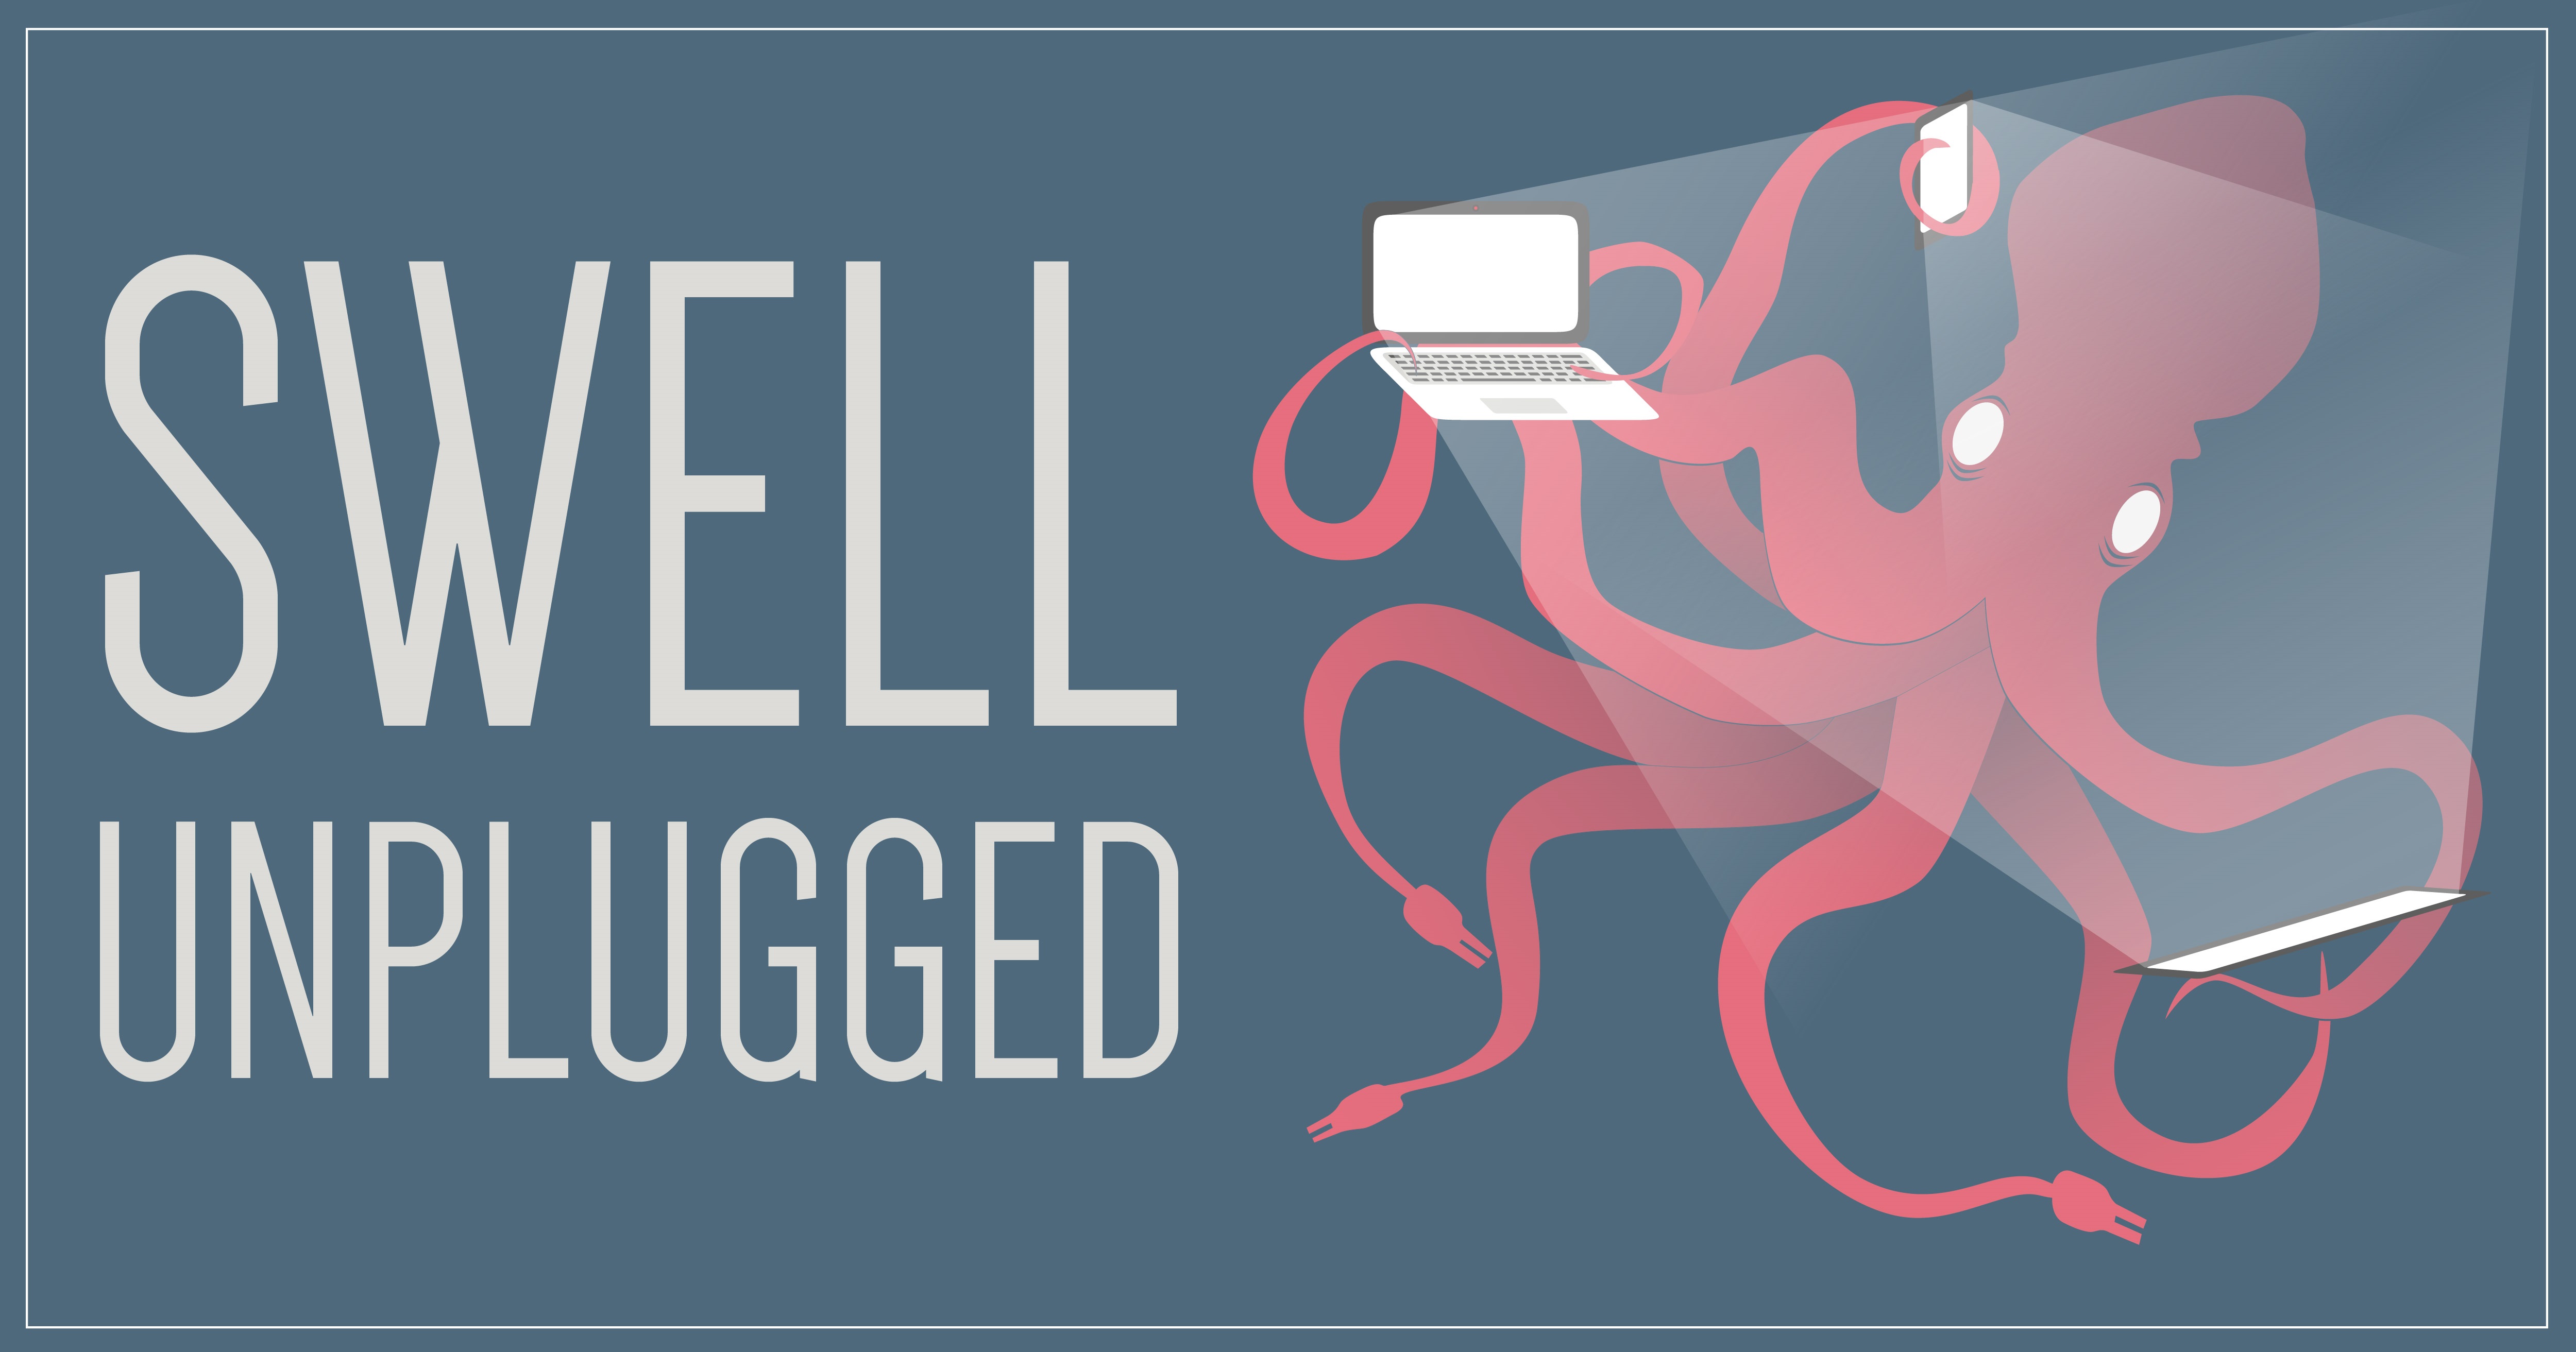 Graphic with a grey background that reads "SWELL Unplugged" on the left. On the right, there is a red octopus holding a laptop, phone, and tablet, all with brightly lit screens.